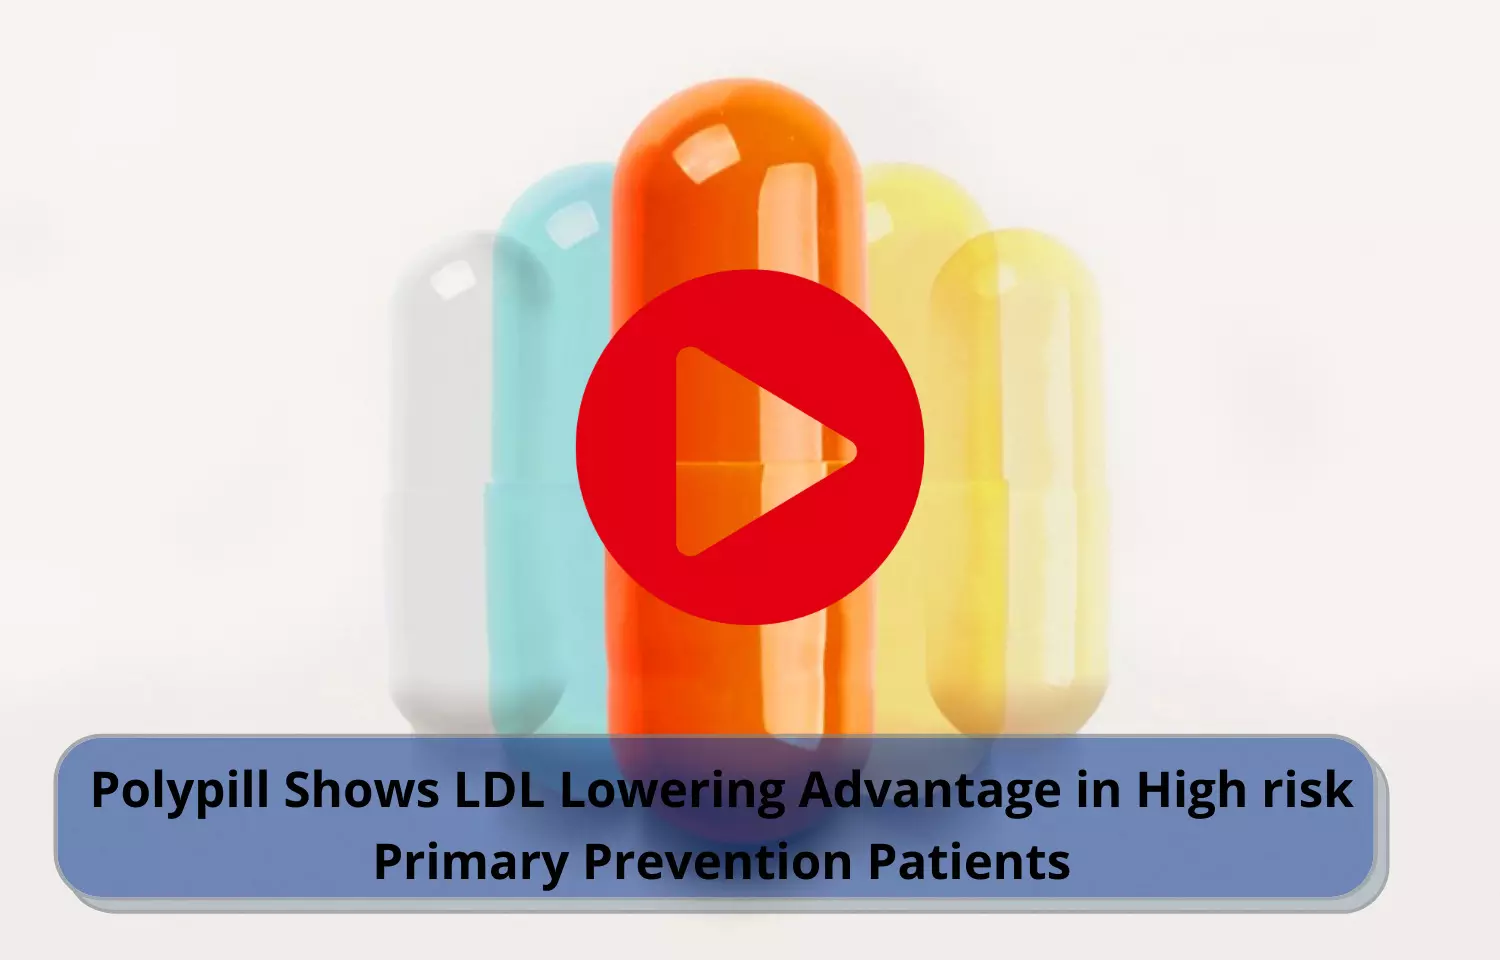 Polypill Shows LDL Lowering Advantage in High risk Primary Prevention Patients